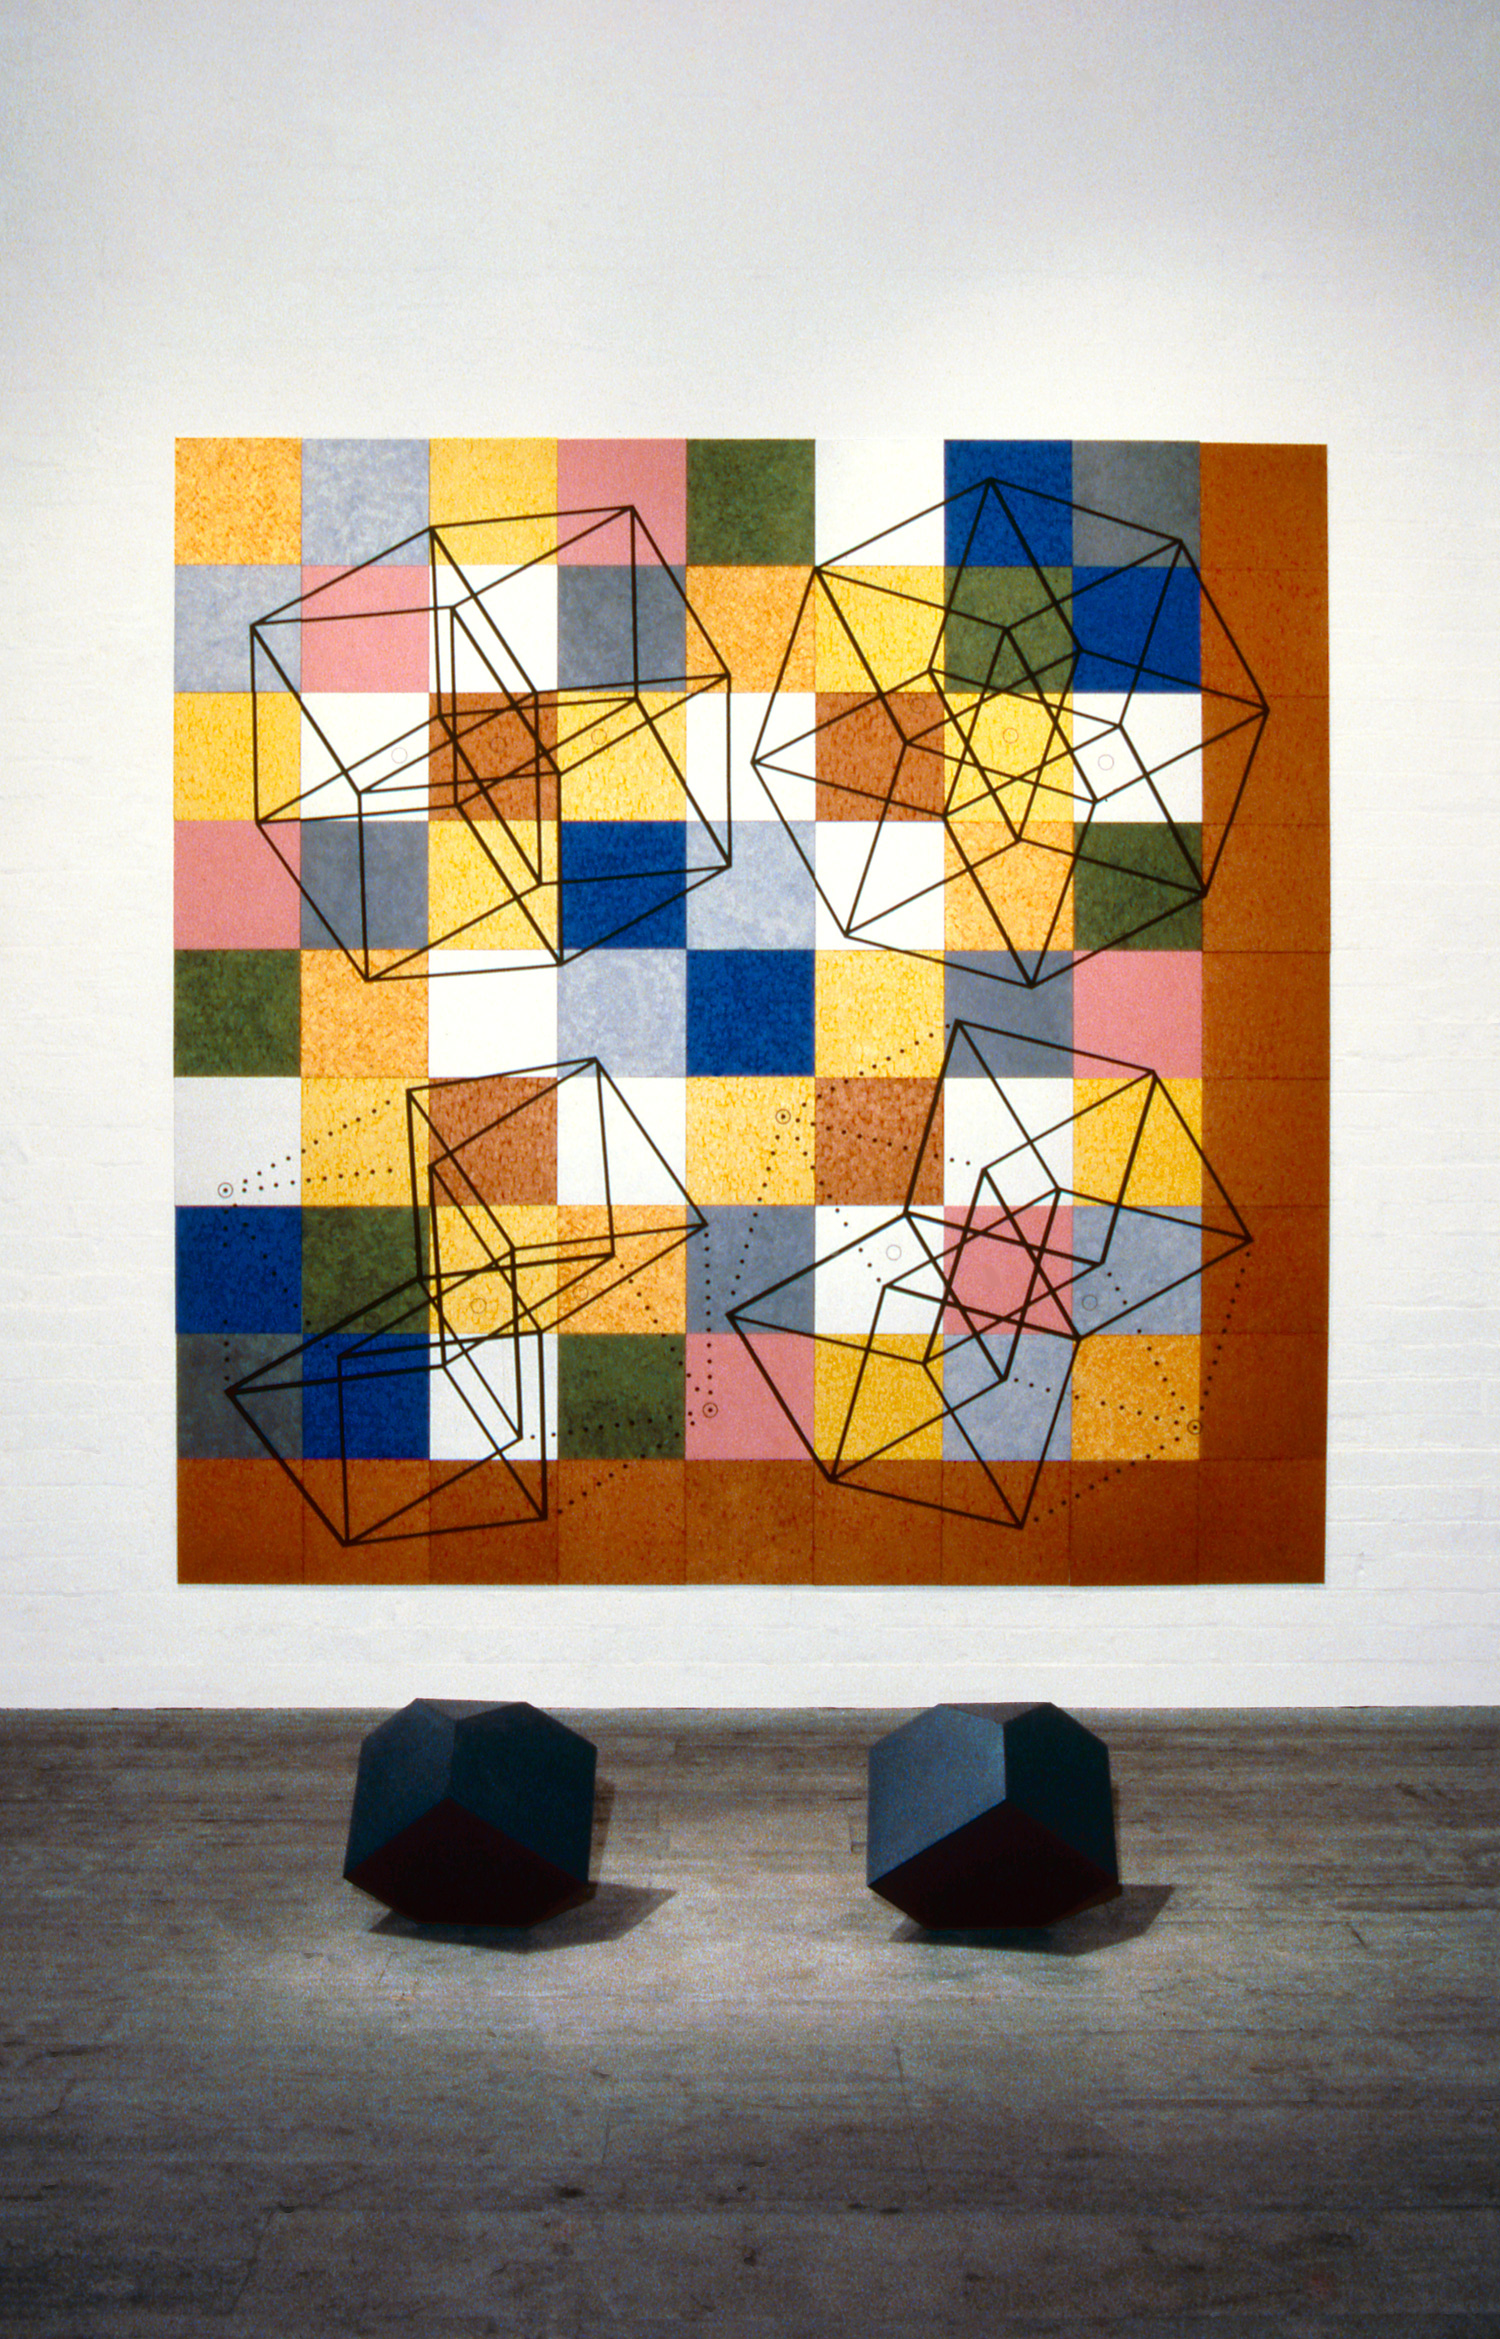   Re-Vision (Melancolia),  1987 Wall: Acrylic, mica and tape on 81 canvas boards, 274 x 274cm Floor: Wood, sand and formica, 48 x 48 x 48cm each &nbsp; 